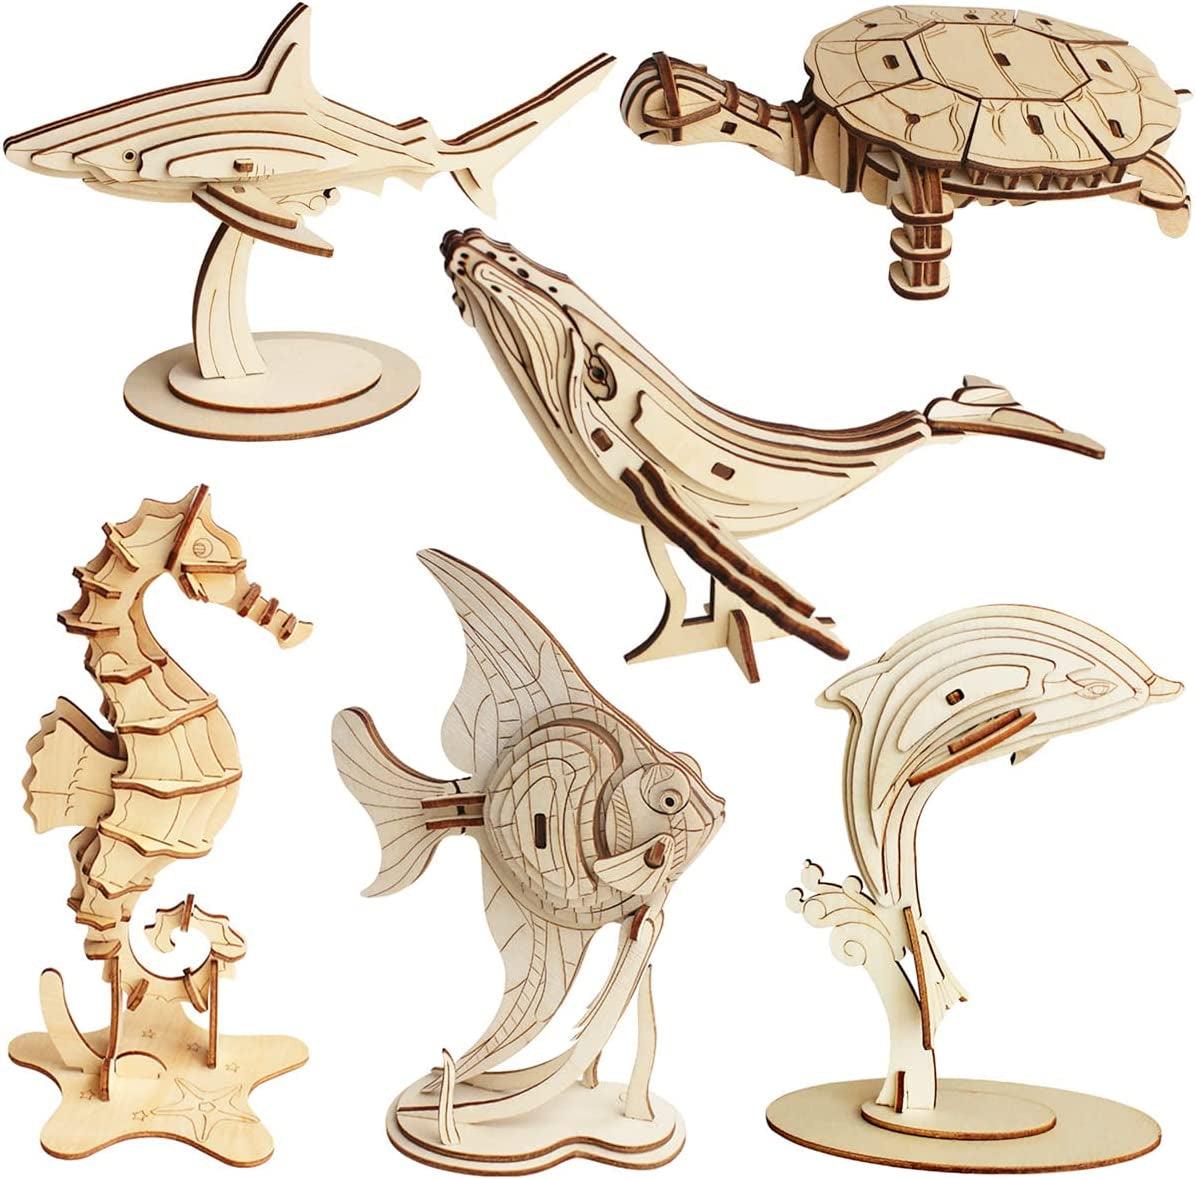 3D Wooden Sea Animal Puzzle - 6 Piece Set Wood Sea Animals Skeleton Assembly Model Kits